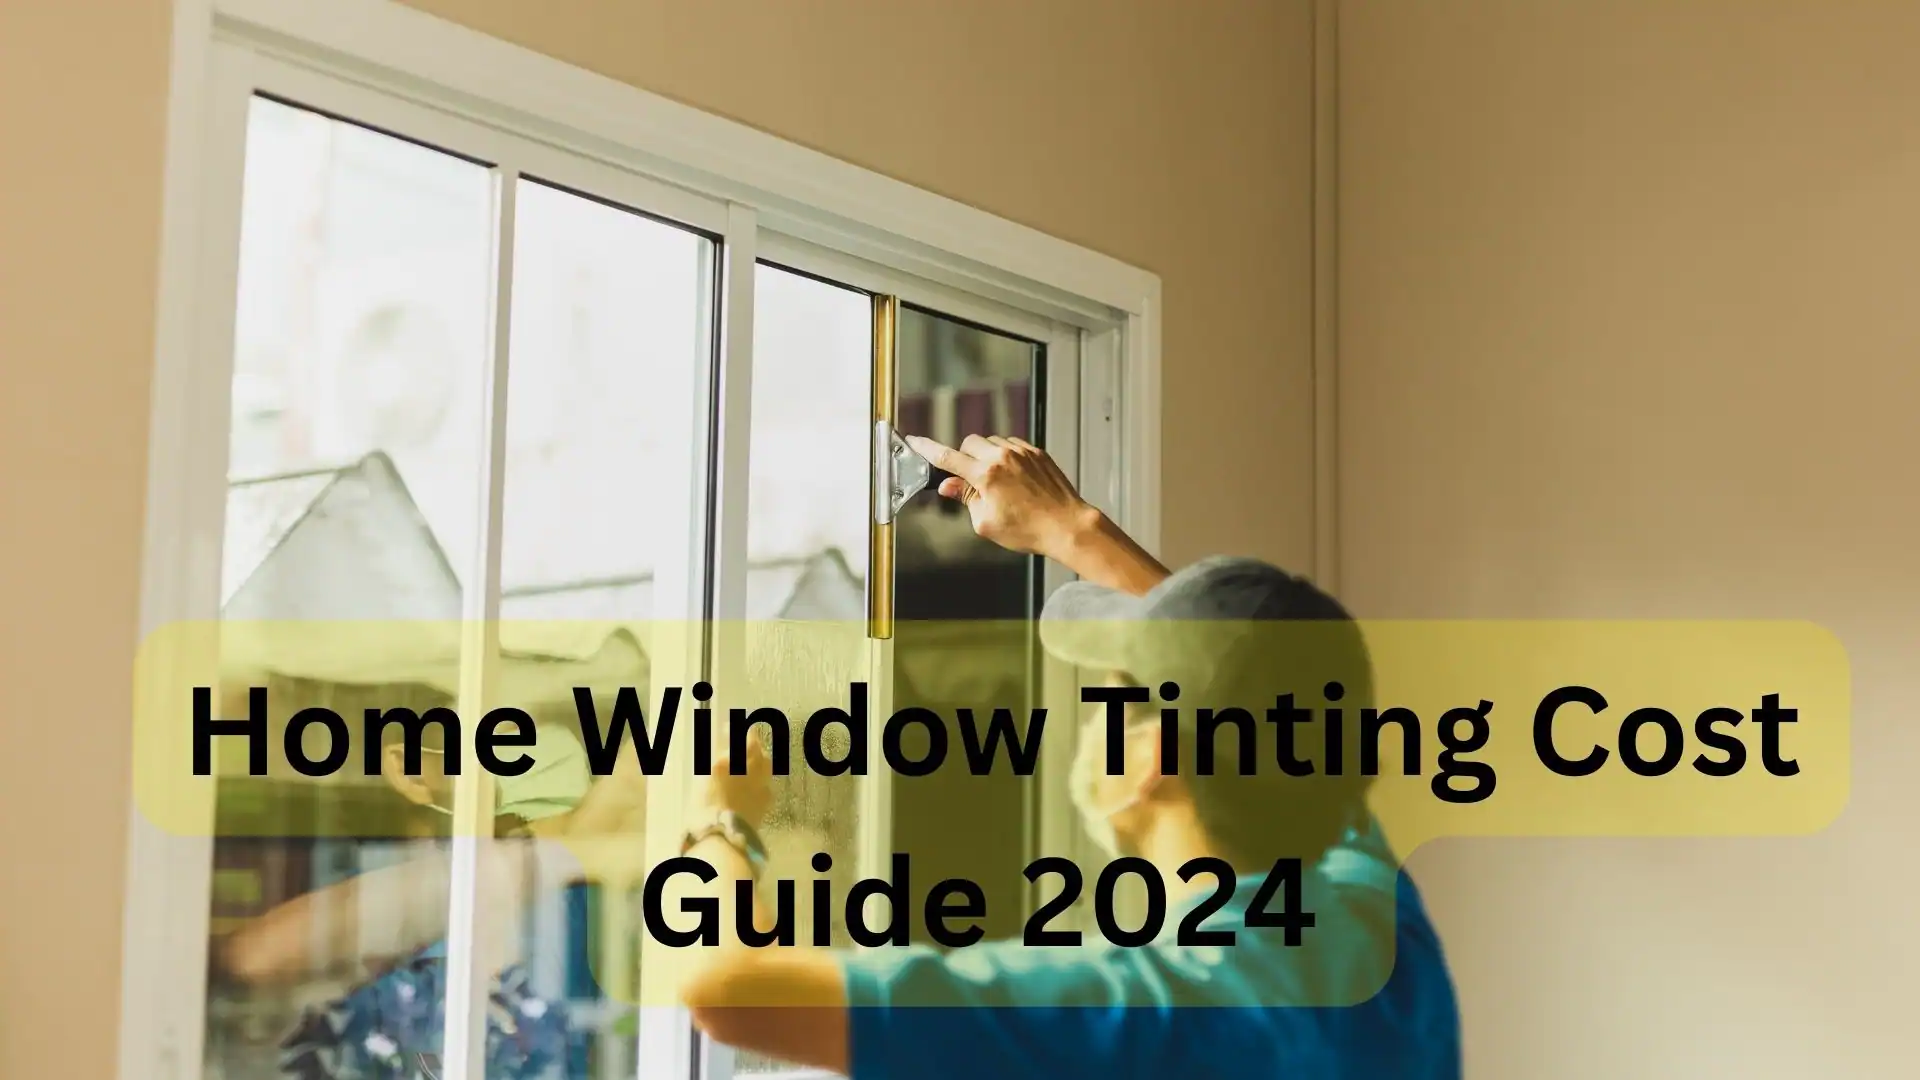 Home Window Tinting Cost Guide 2024